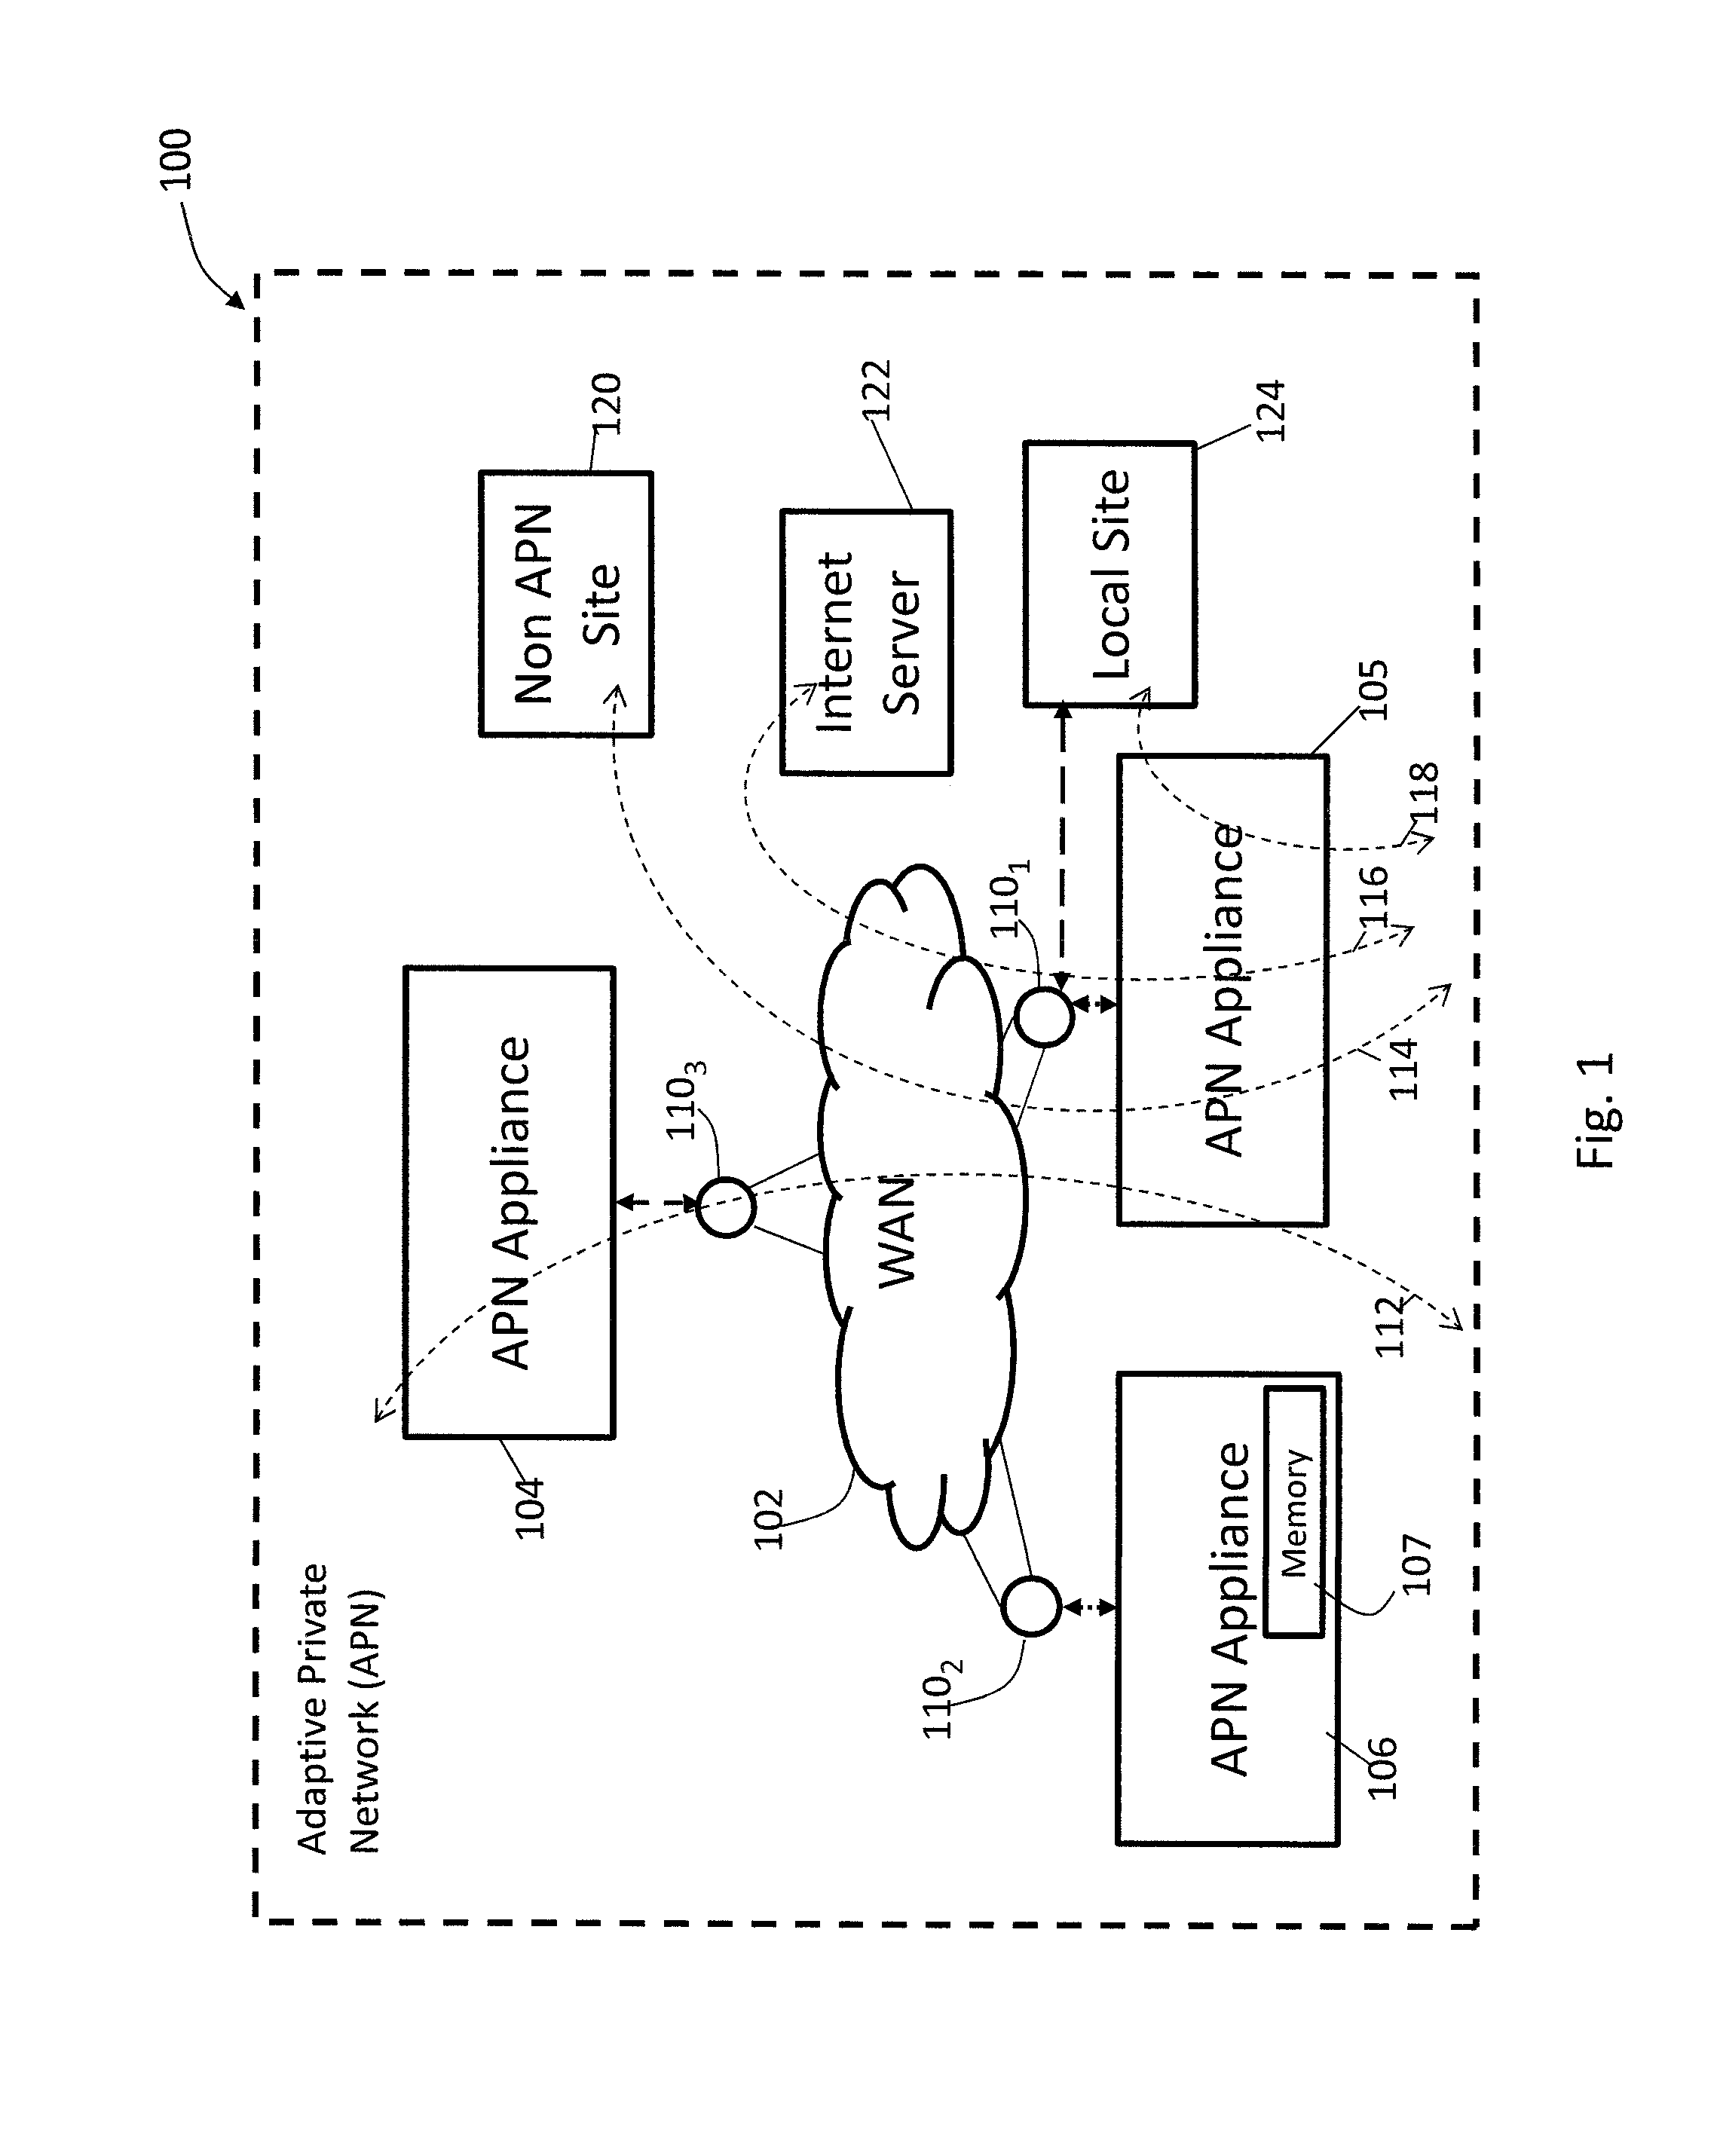 Adaptive Private Network with Geographically Redundant Network Control Nodes